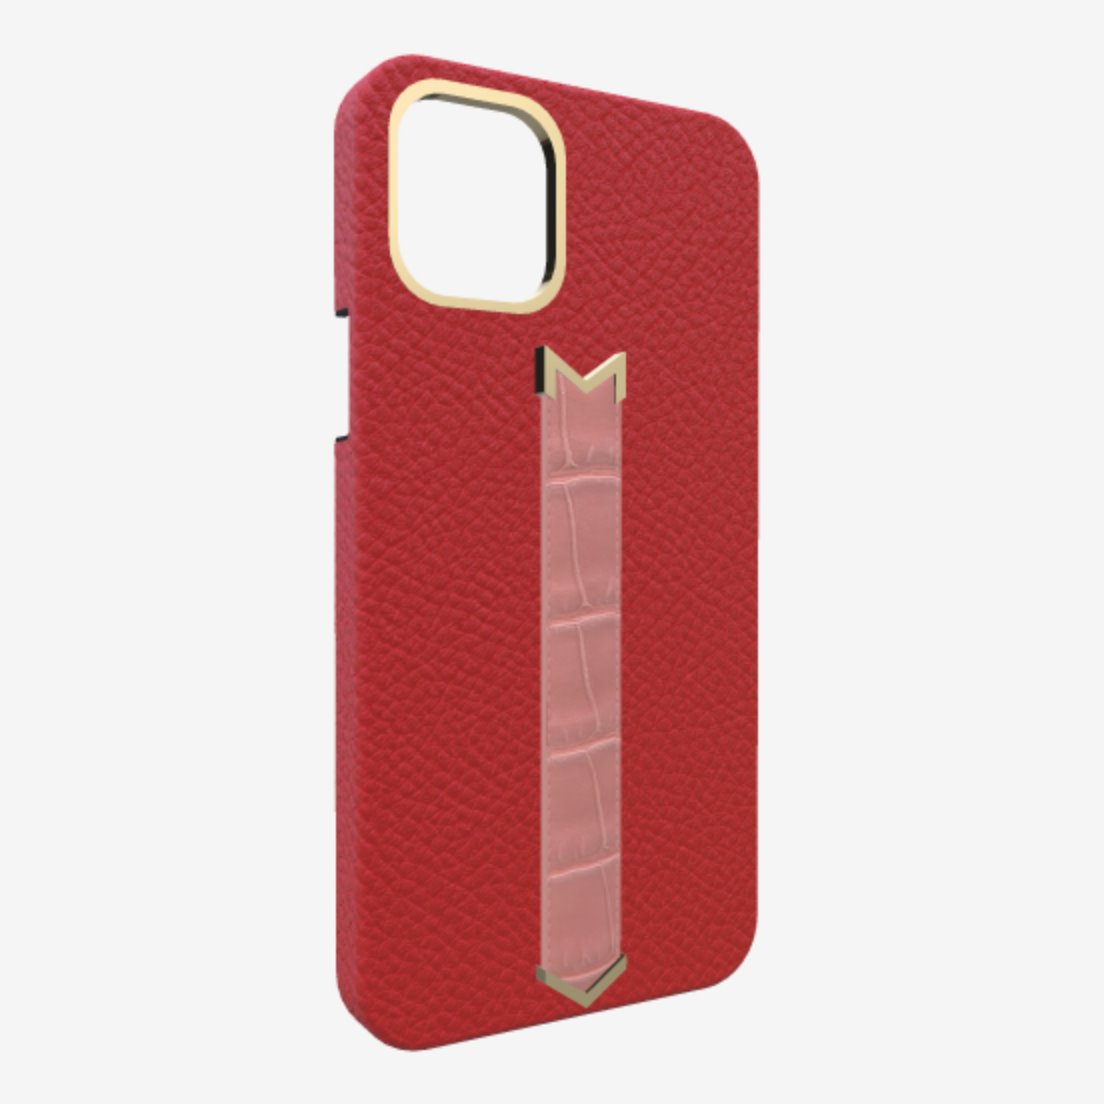 LOUIS VUITTON LV LOGO PATTERN RED iPhone 14 Pro Max Case Cover